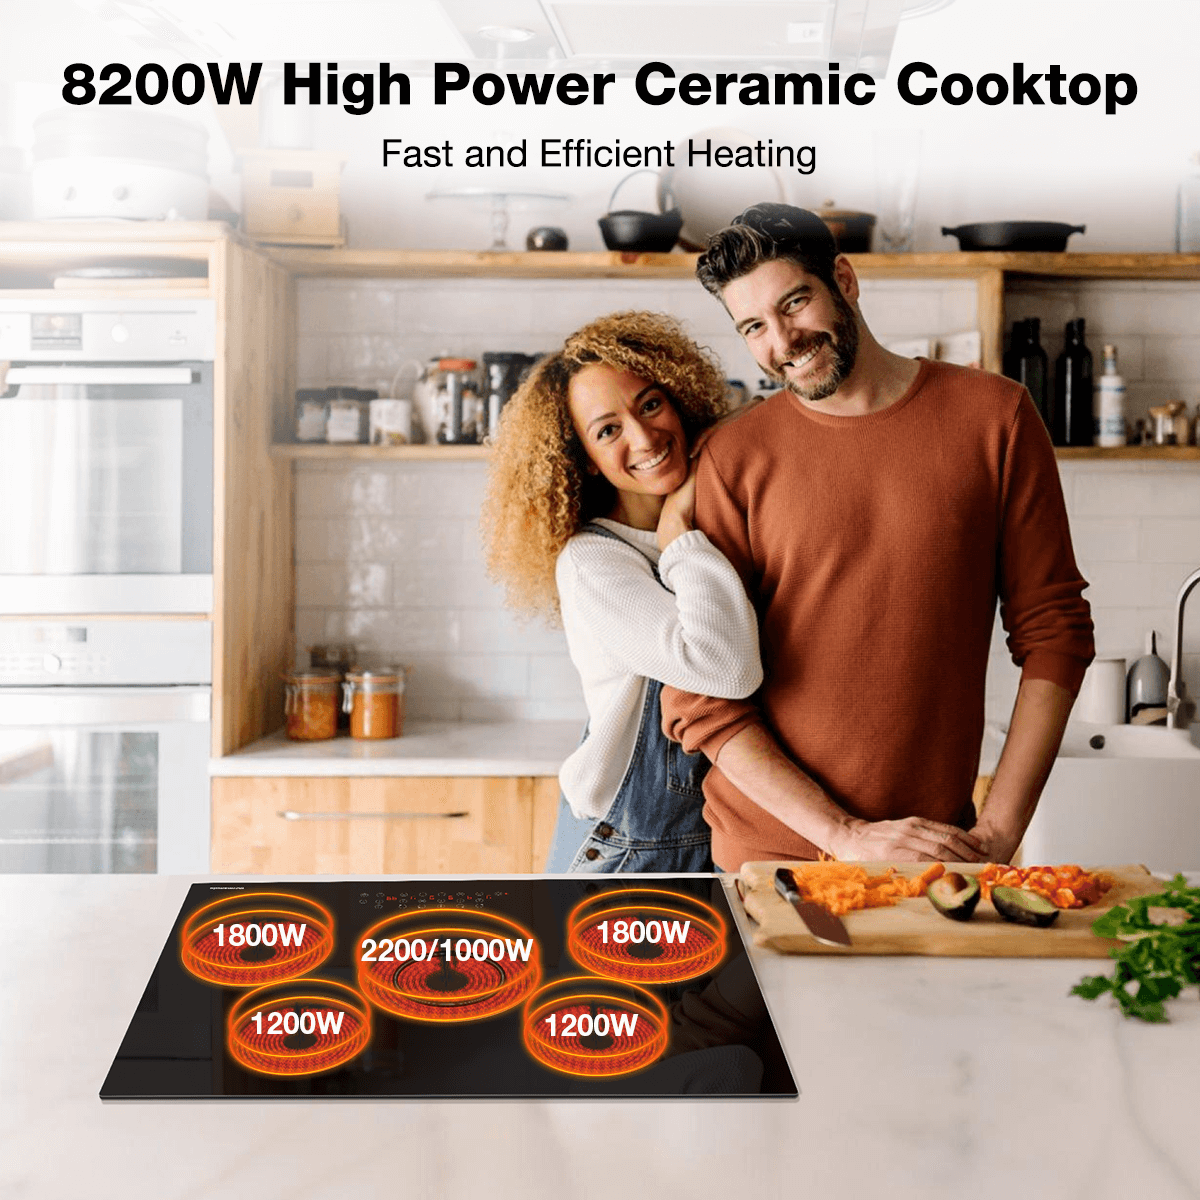 8200W High Power Ceramic Cooktop | Thermomate